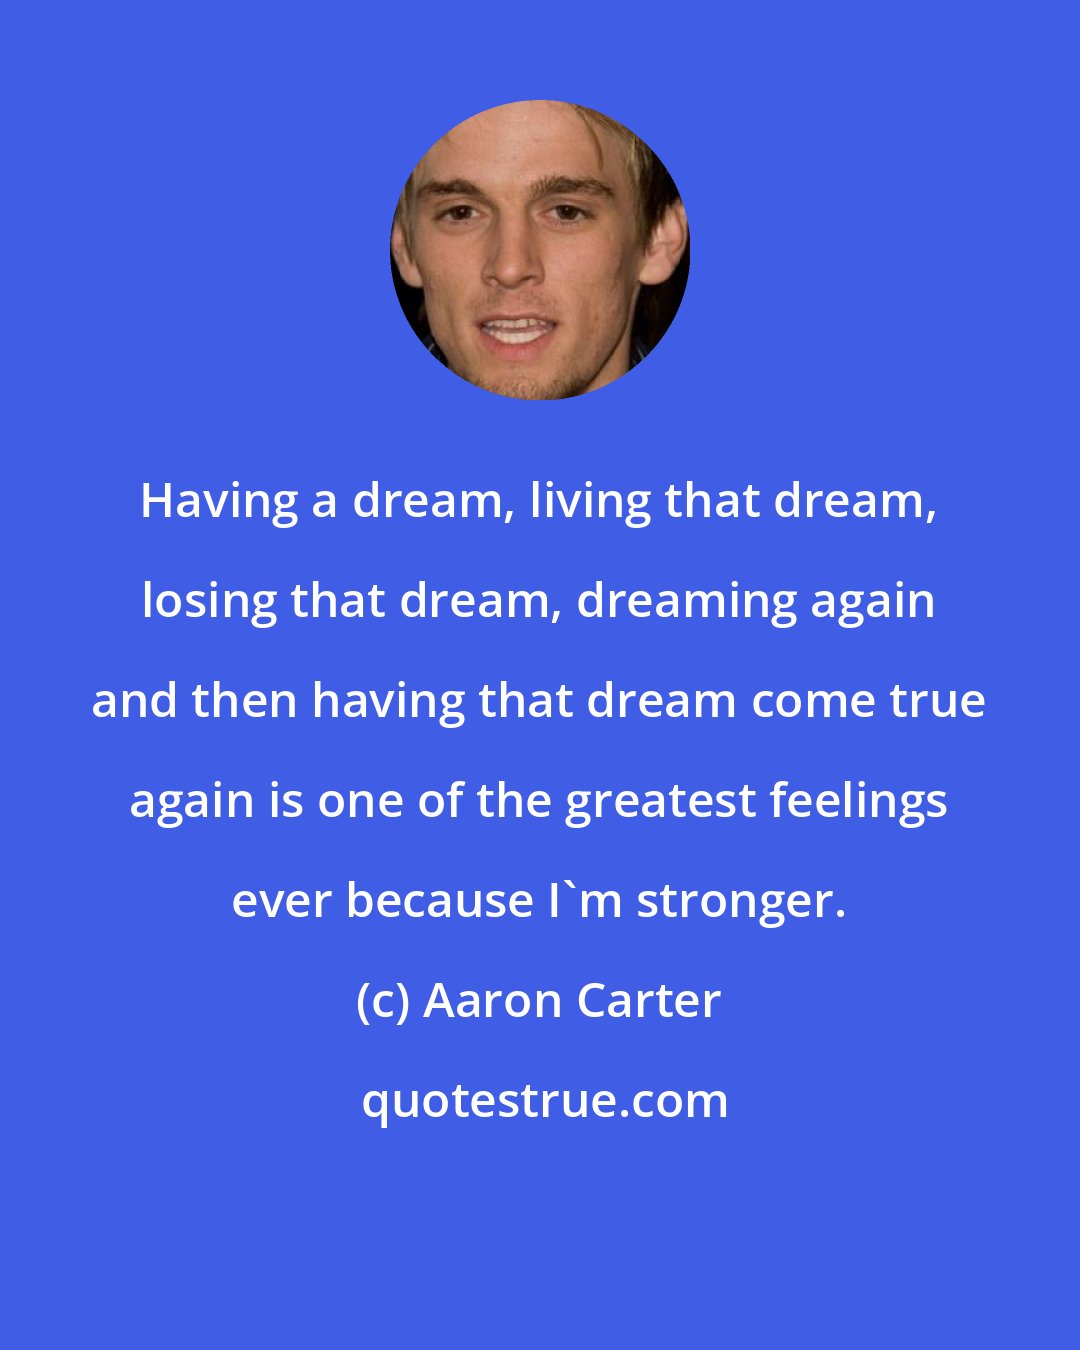 Aaron Carter: Having a dream, living that dream, losing that dream, dreaming again and then having that dream come true again is one of the greatest feelings ever because I`m stronger.